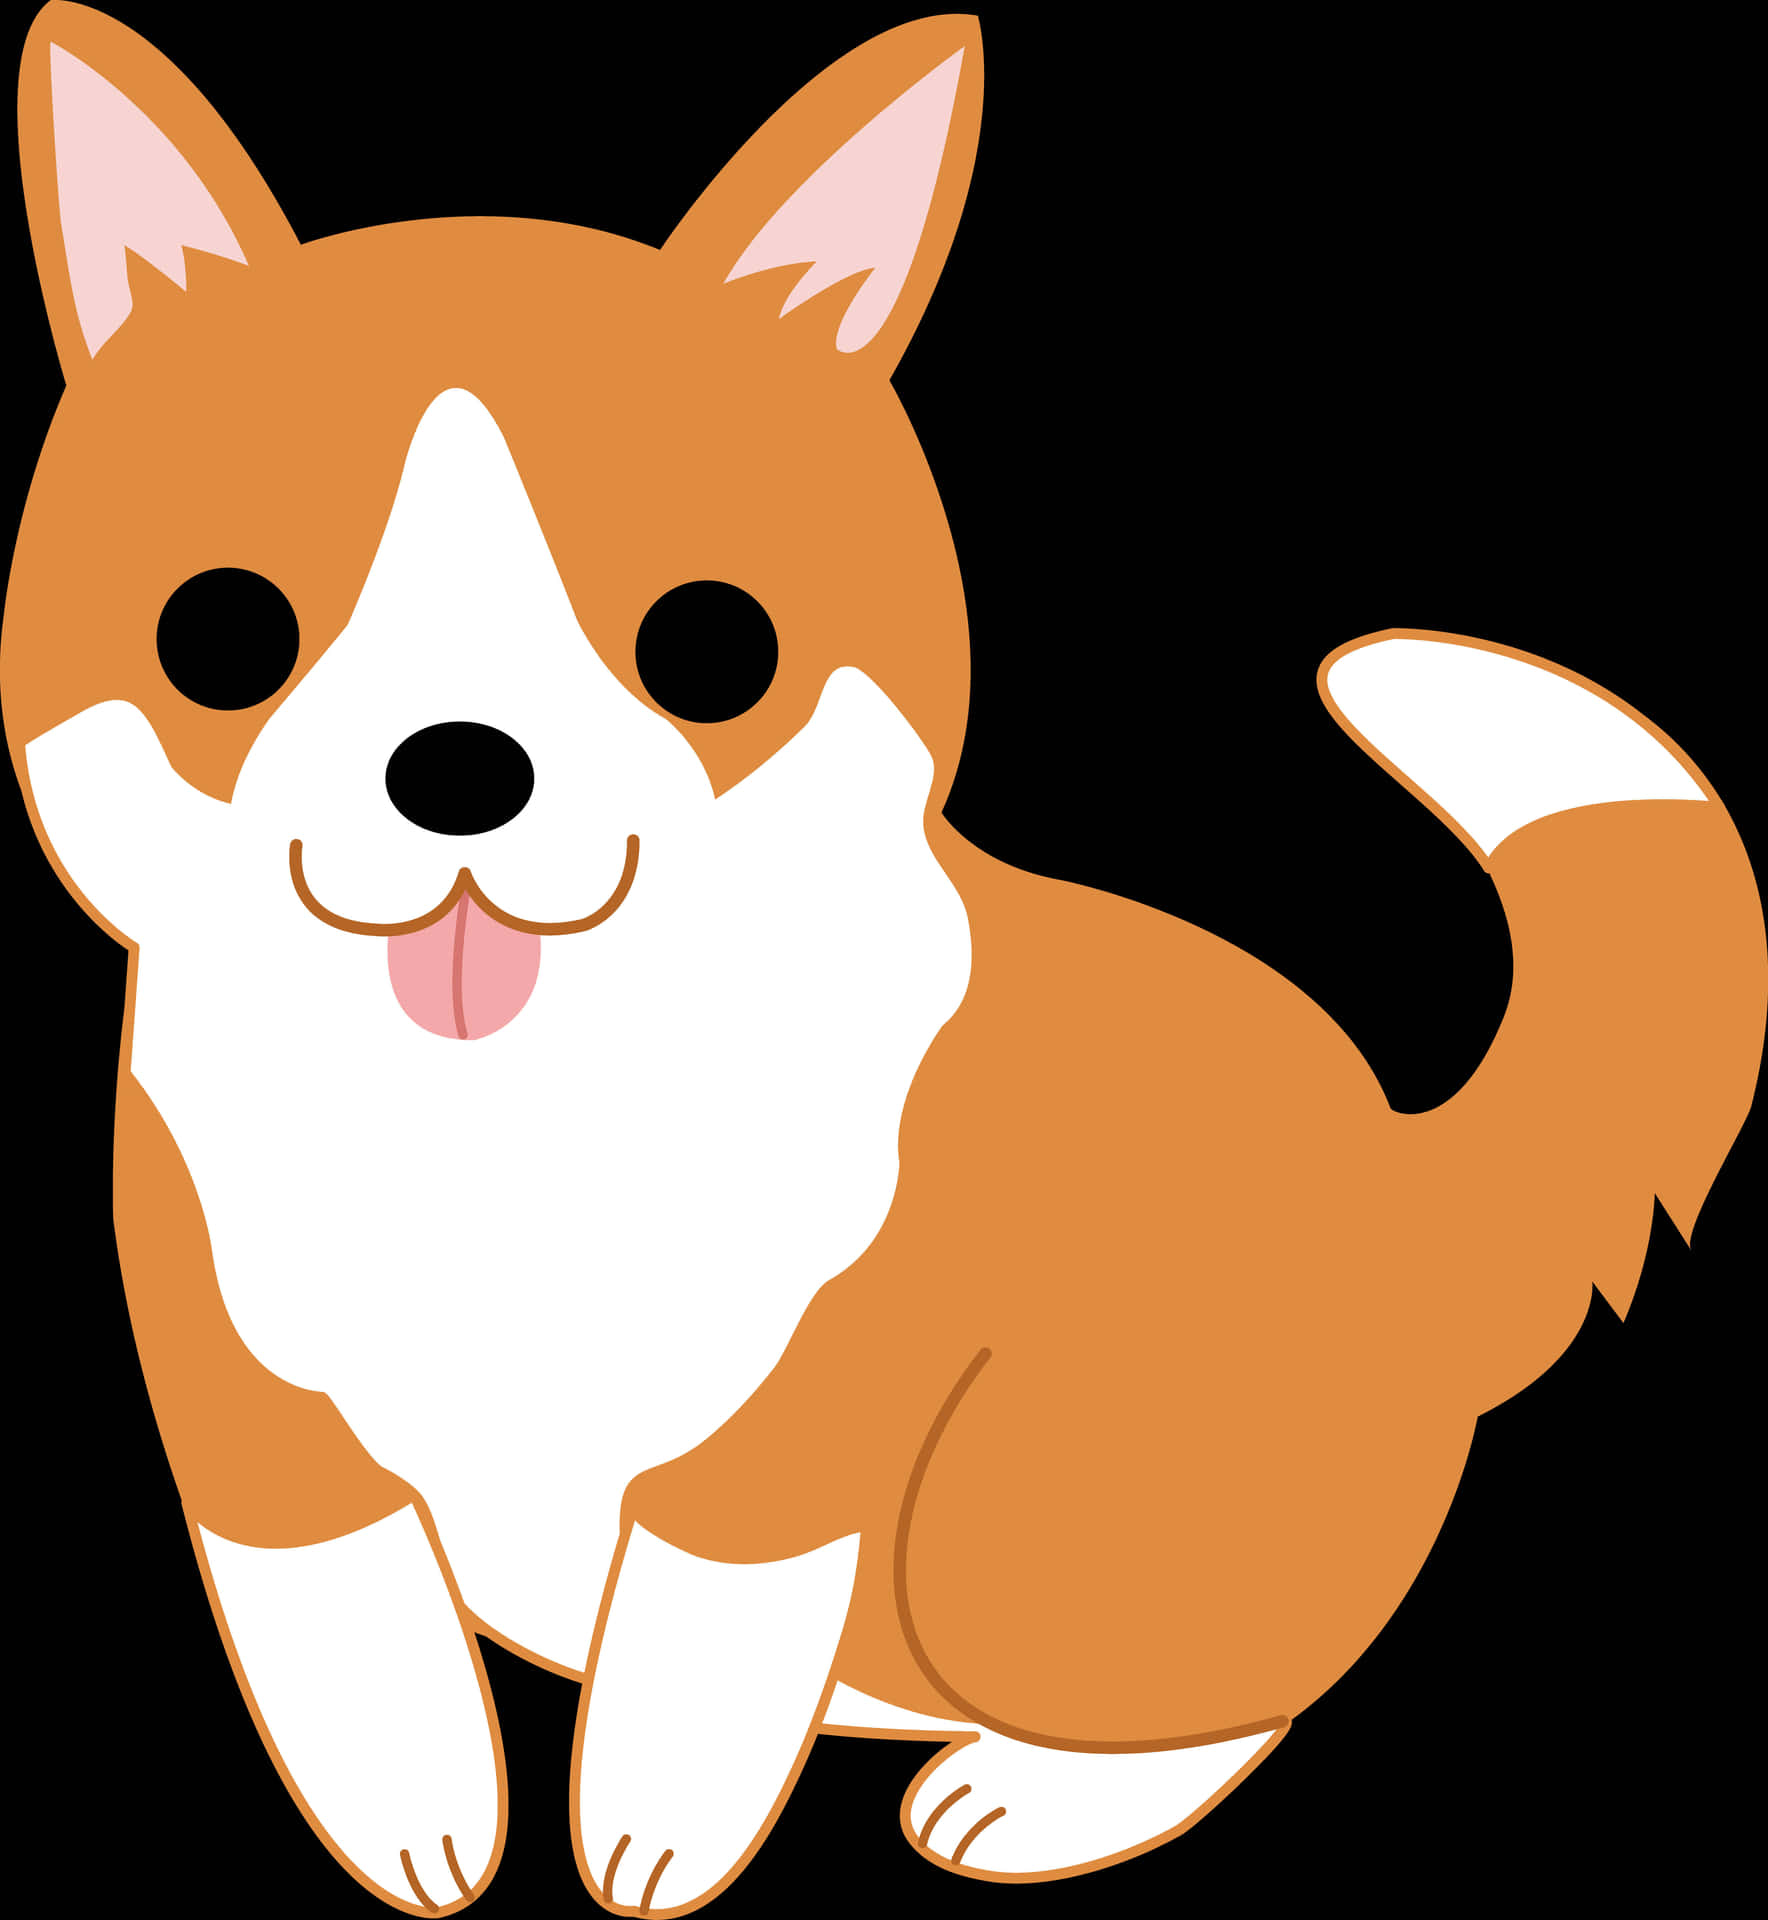 Cute Cartoon Dog With Tongue Out Background